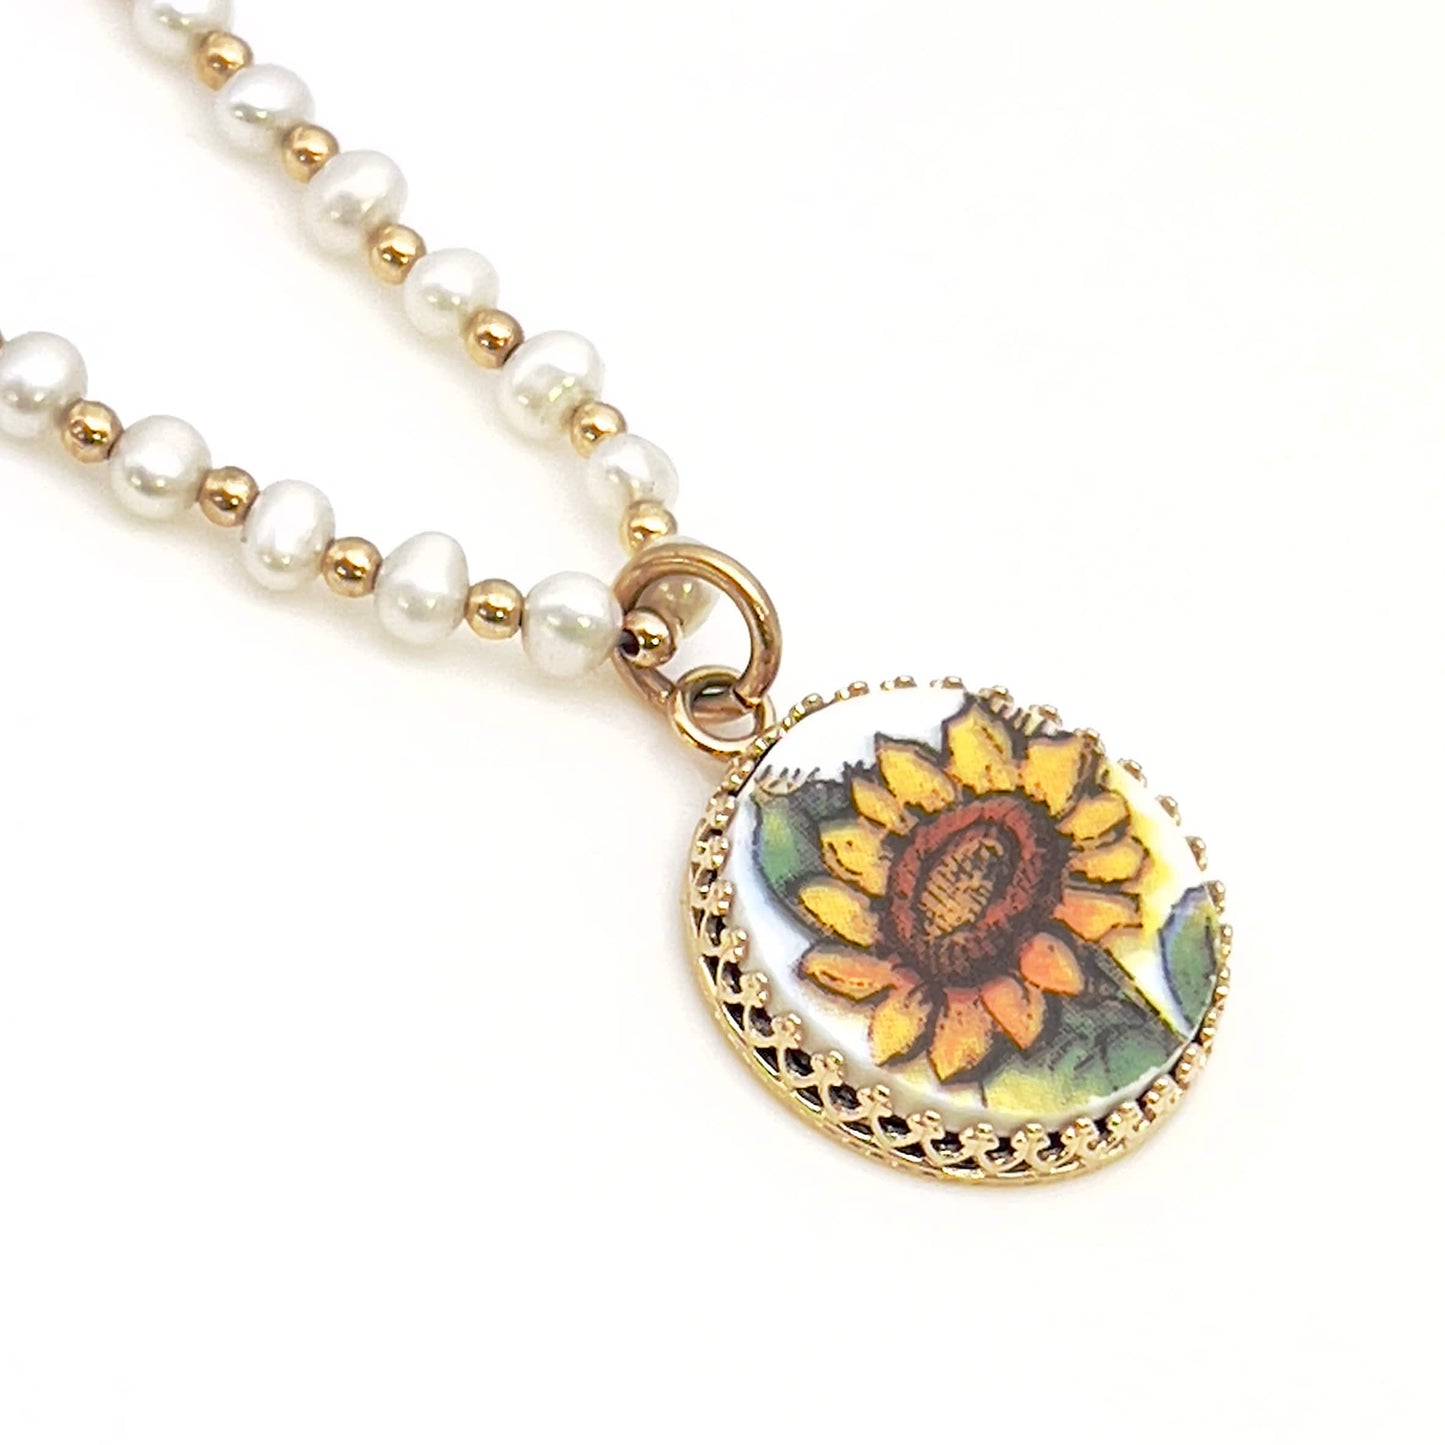 14k Gold Sunflower Necklace, Pearl Broken China Jewelry, Unique 20th Wedding Anniversary Gift for Wife